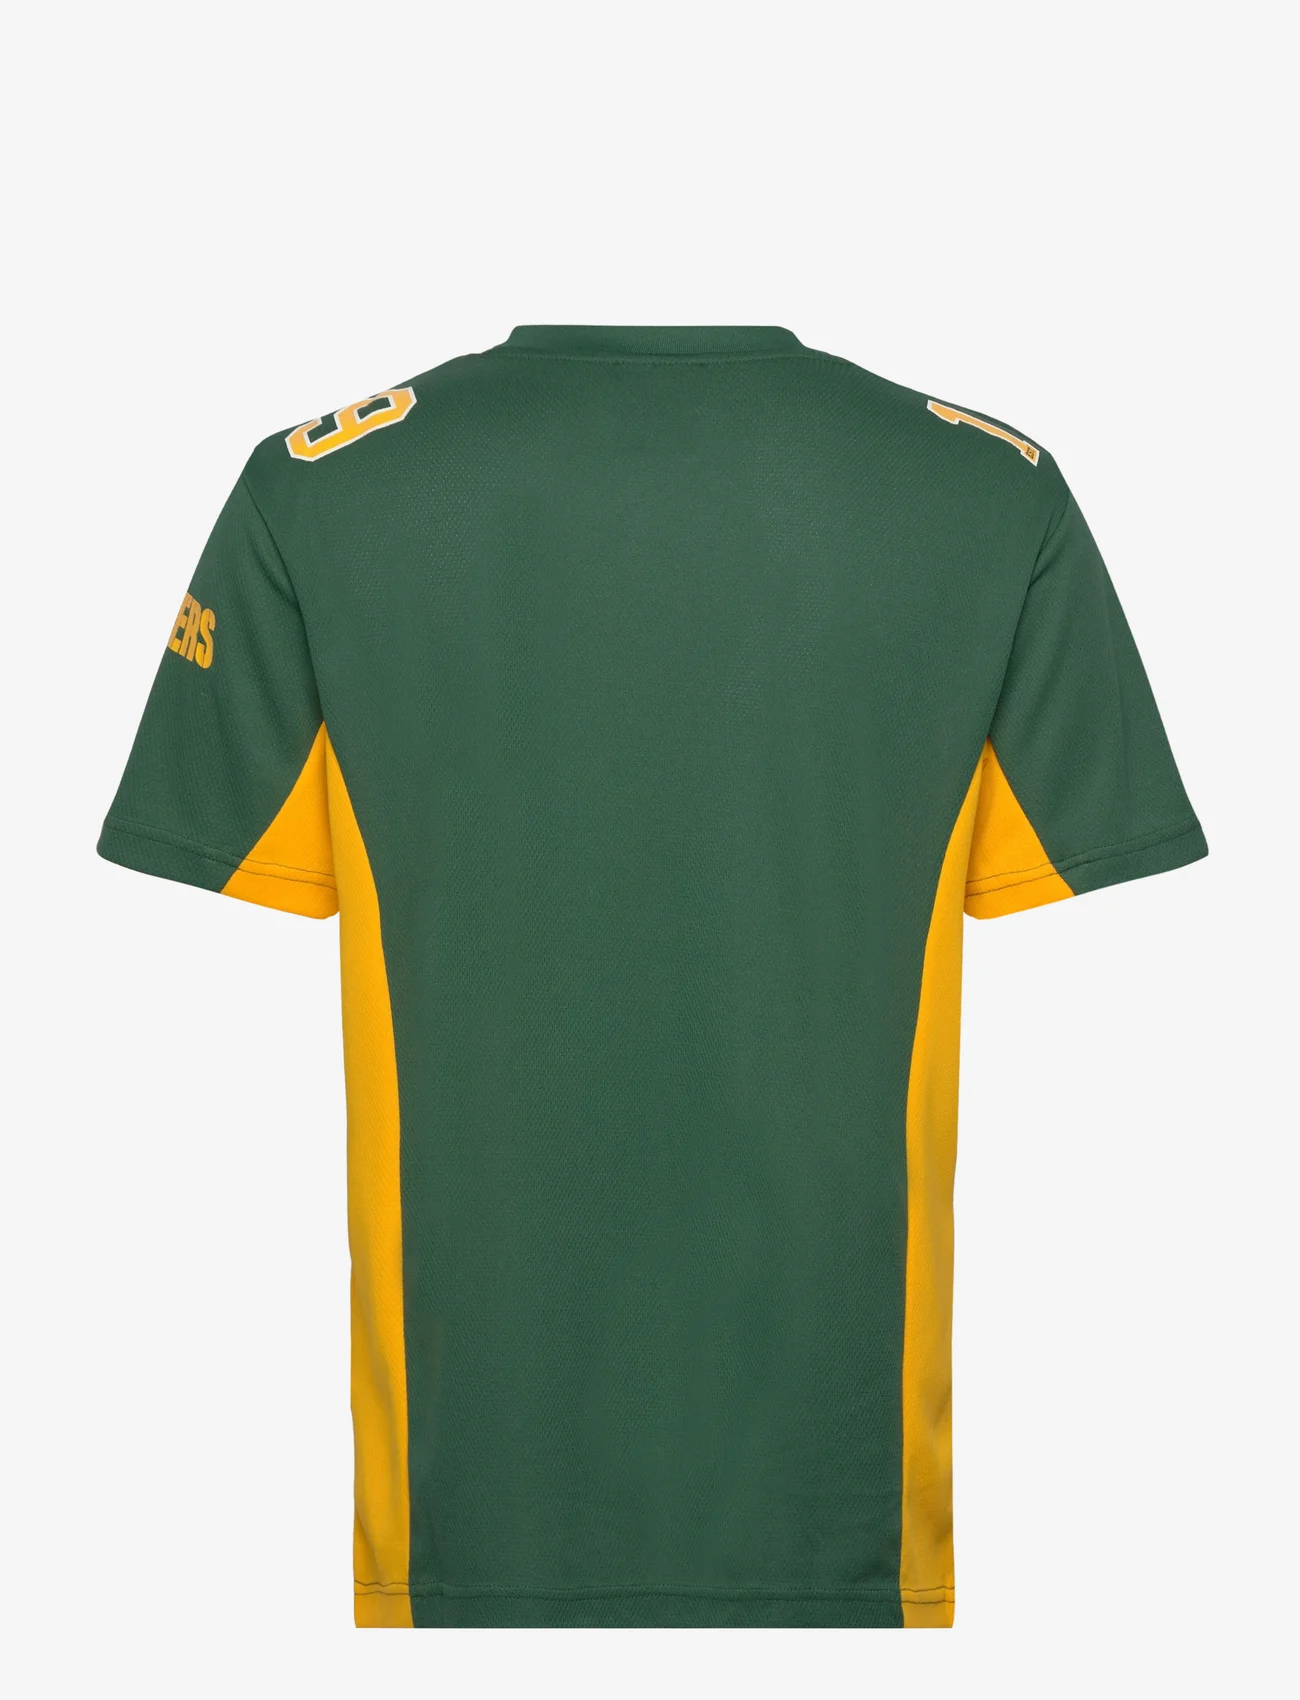 Fanatics - Green Bay Packers NFL Value Franchise Fashion Top - oberteile & t-shirts - dark green,yellow gold - 1